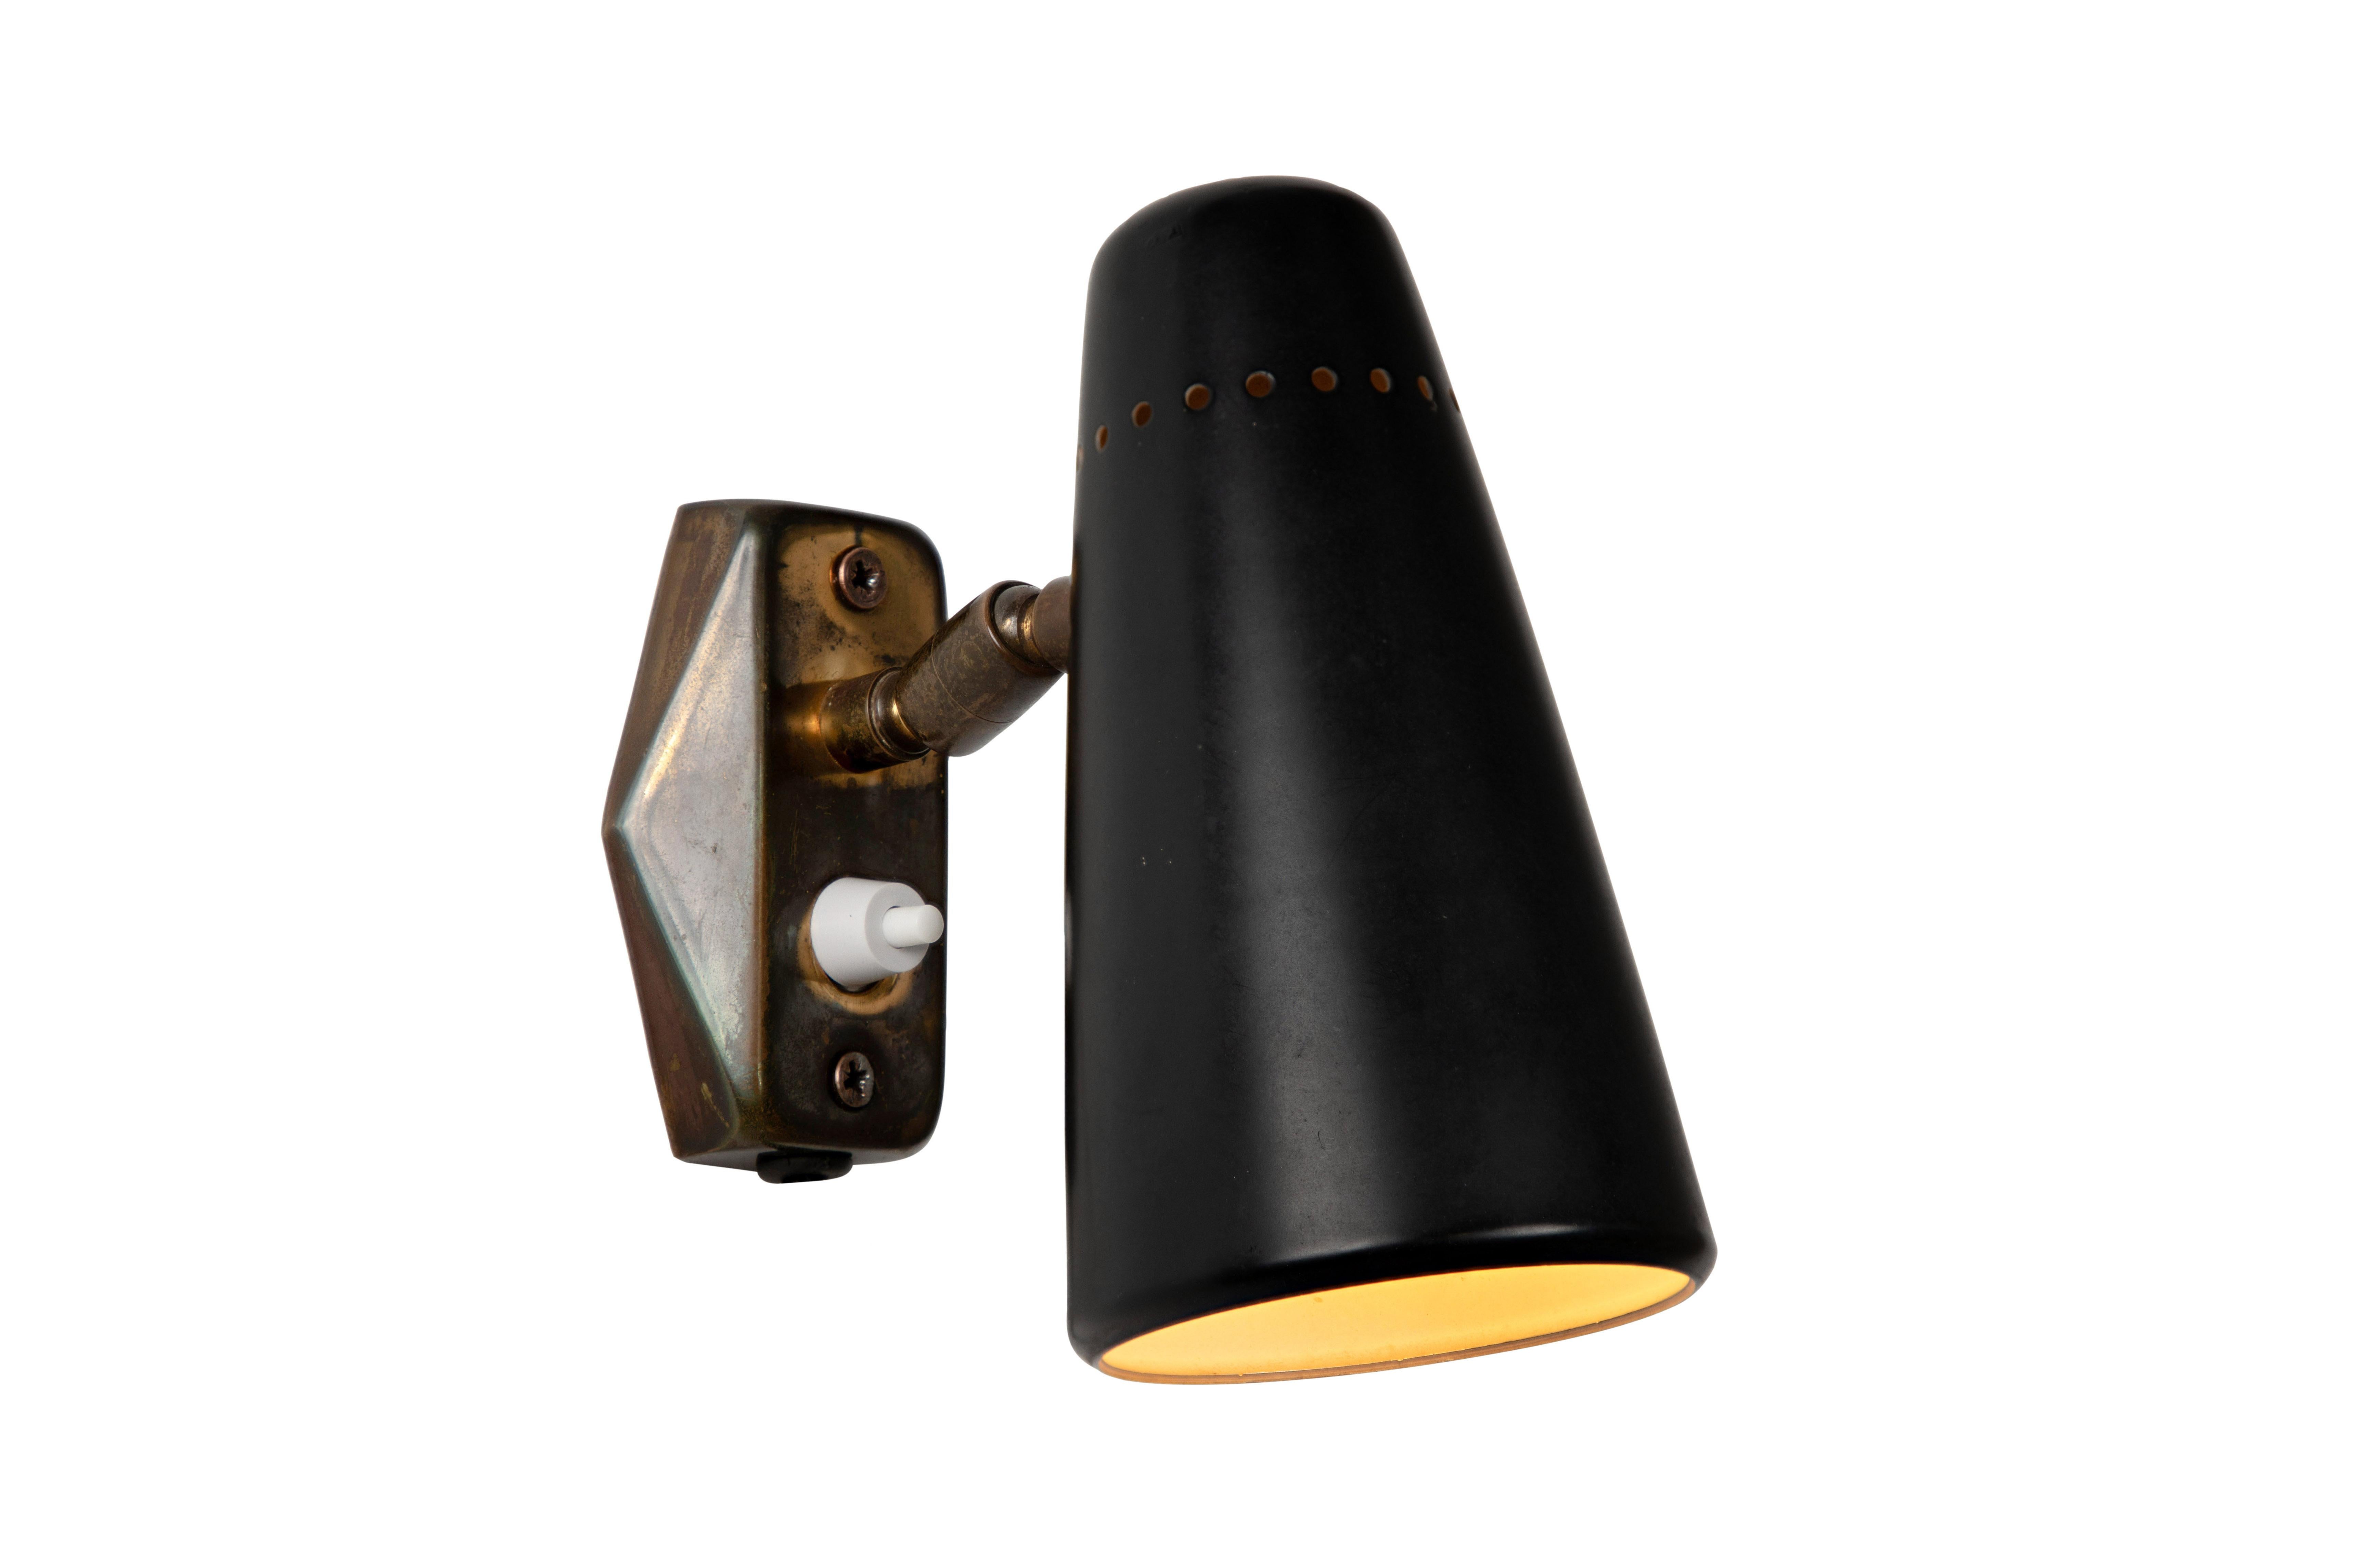 1950s Stilnovo wall light in black and brass. A quintessentially 1950s Italian design executed in black painted metal with original brass backplate. Shade can be rotated freely on a brass ball joint.

One lamp available in this